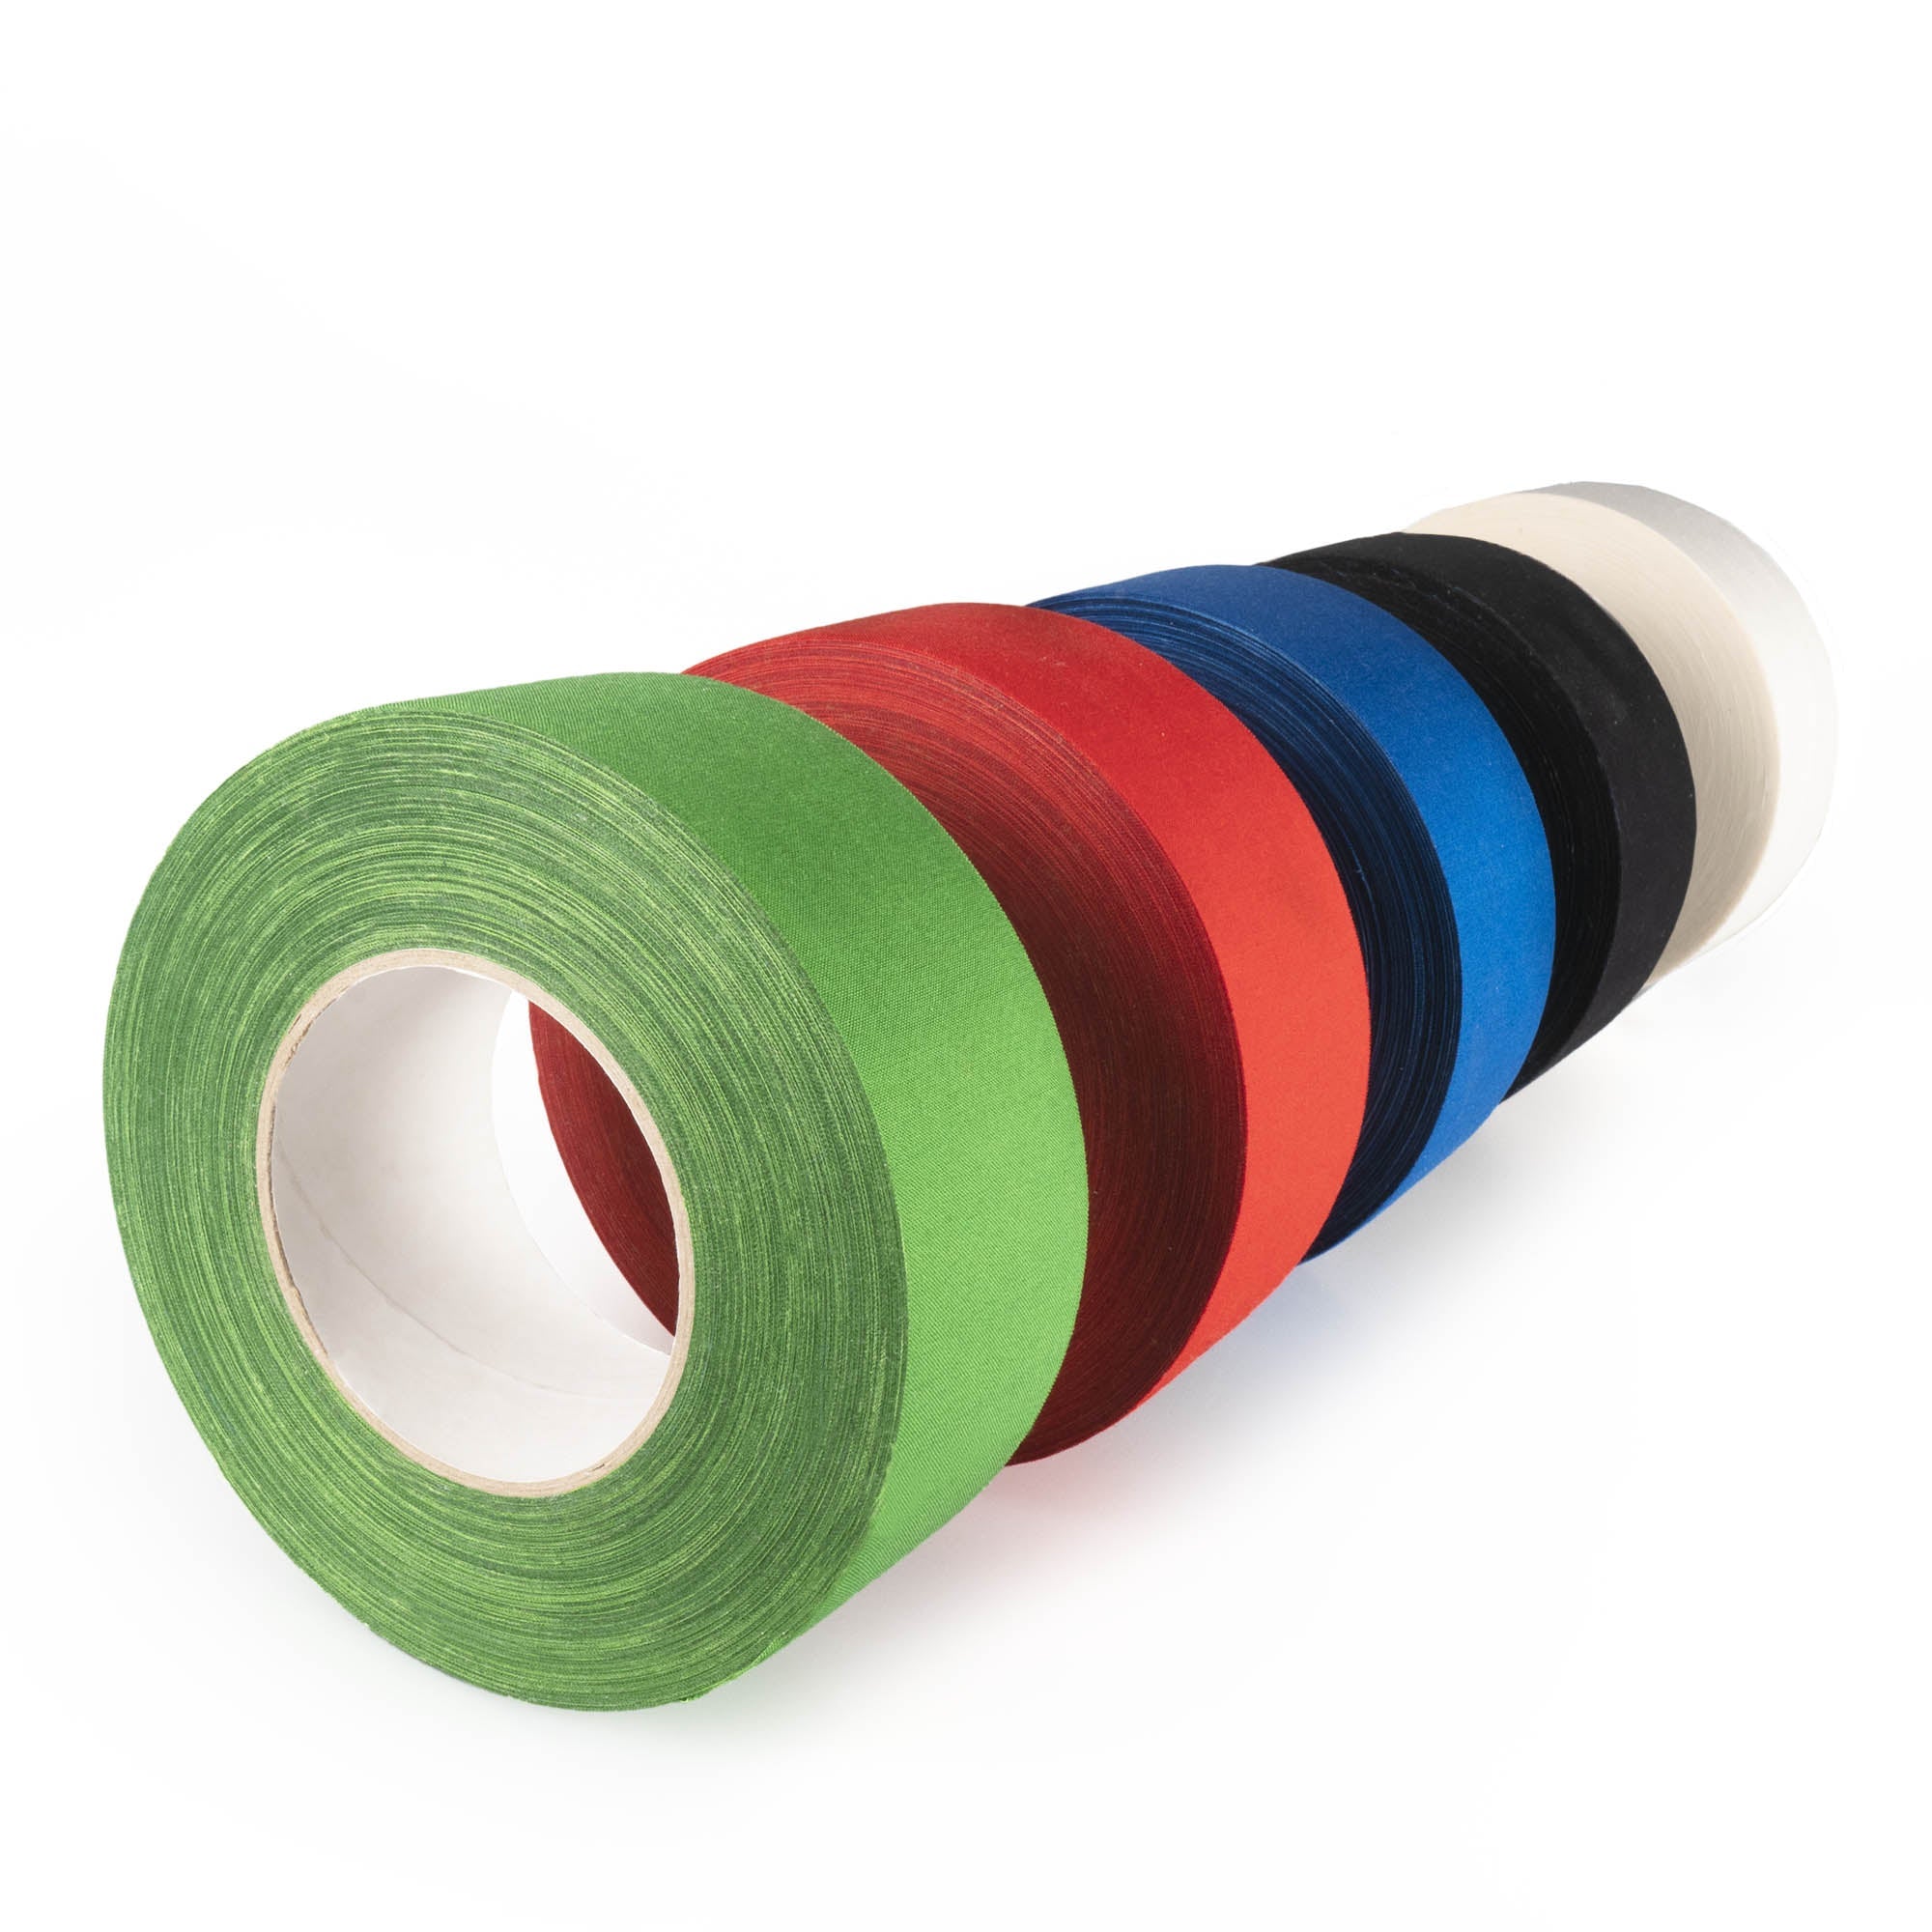 a row of 5cm wide tape